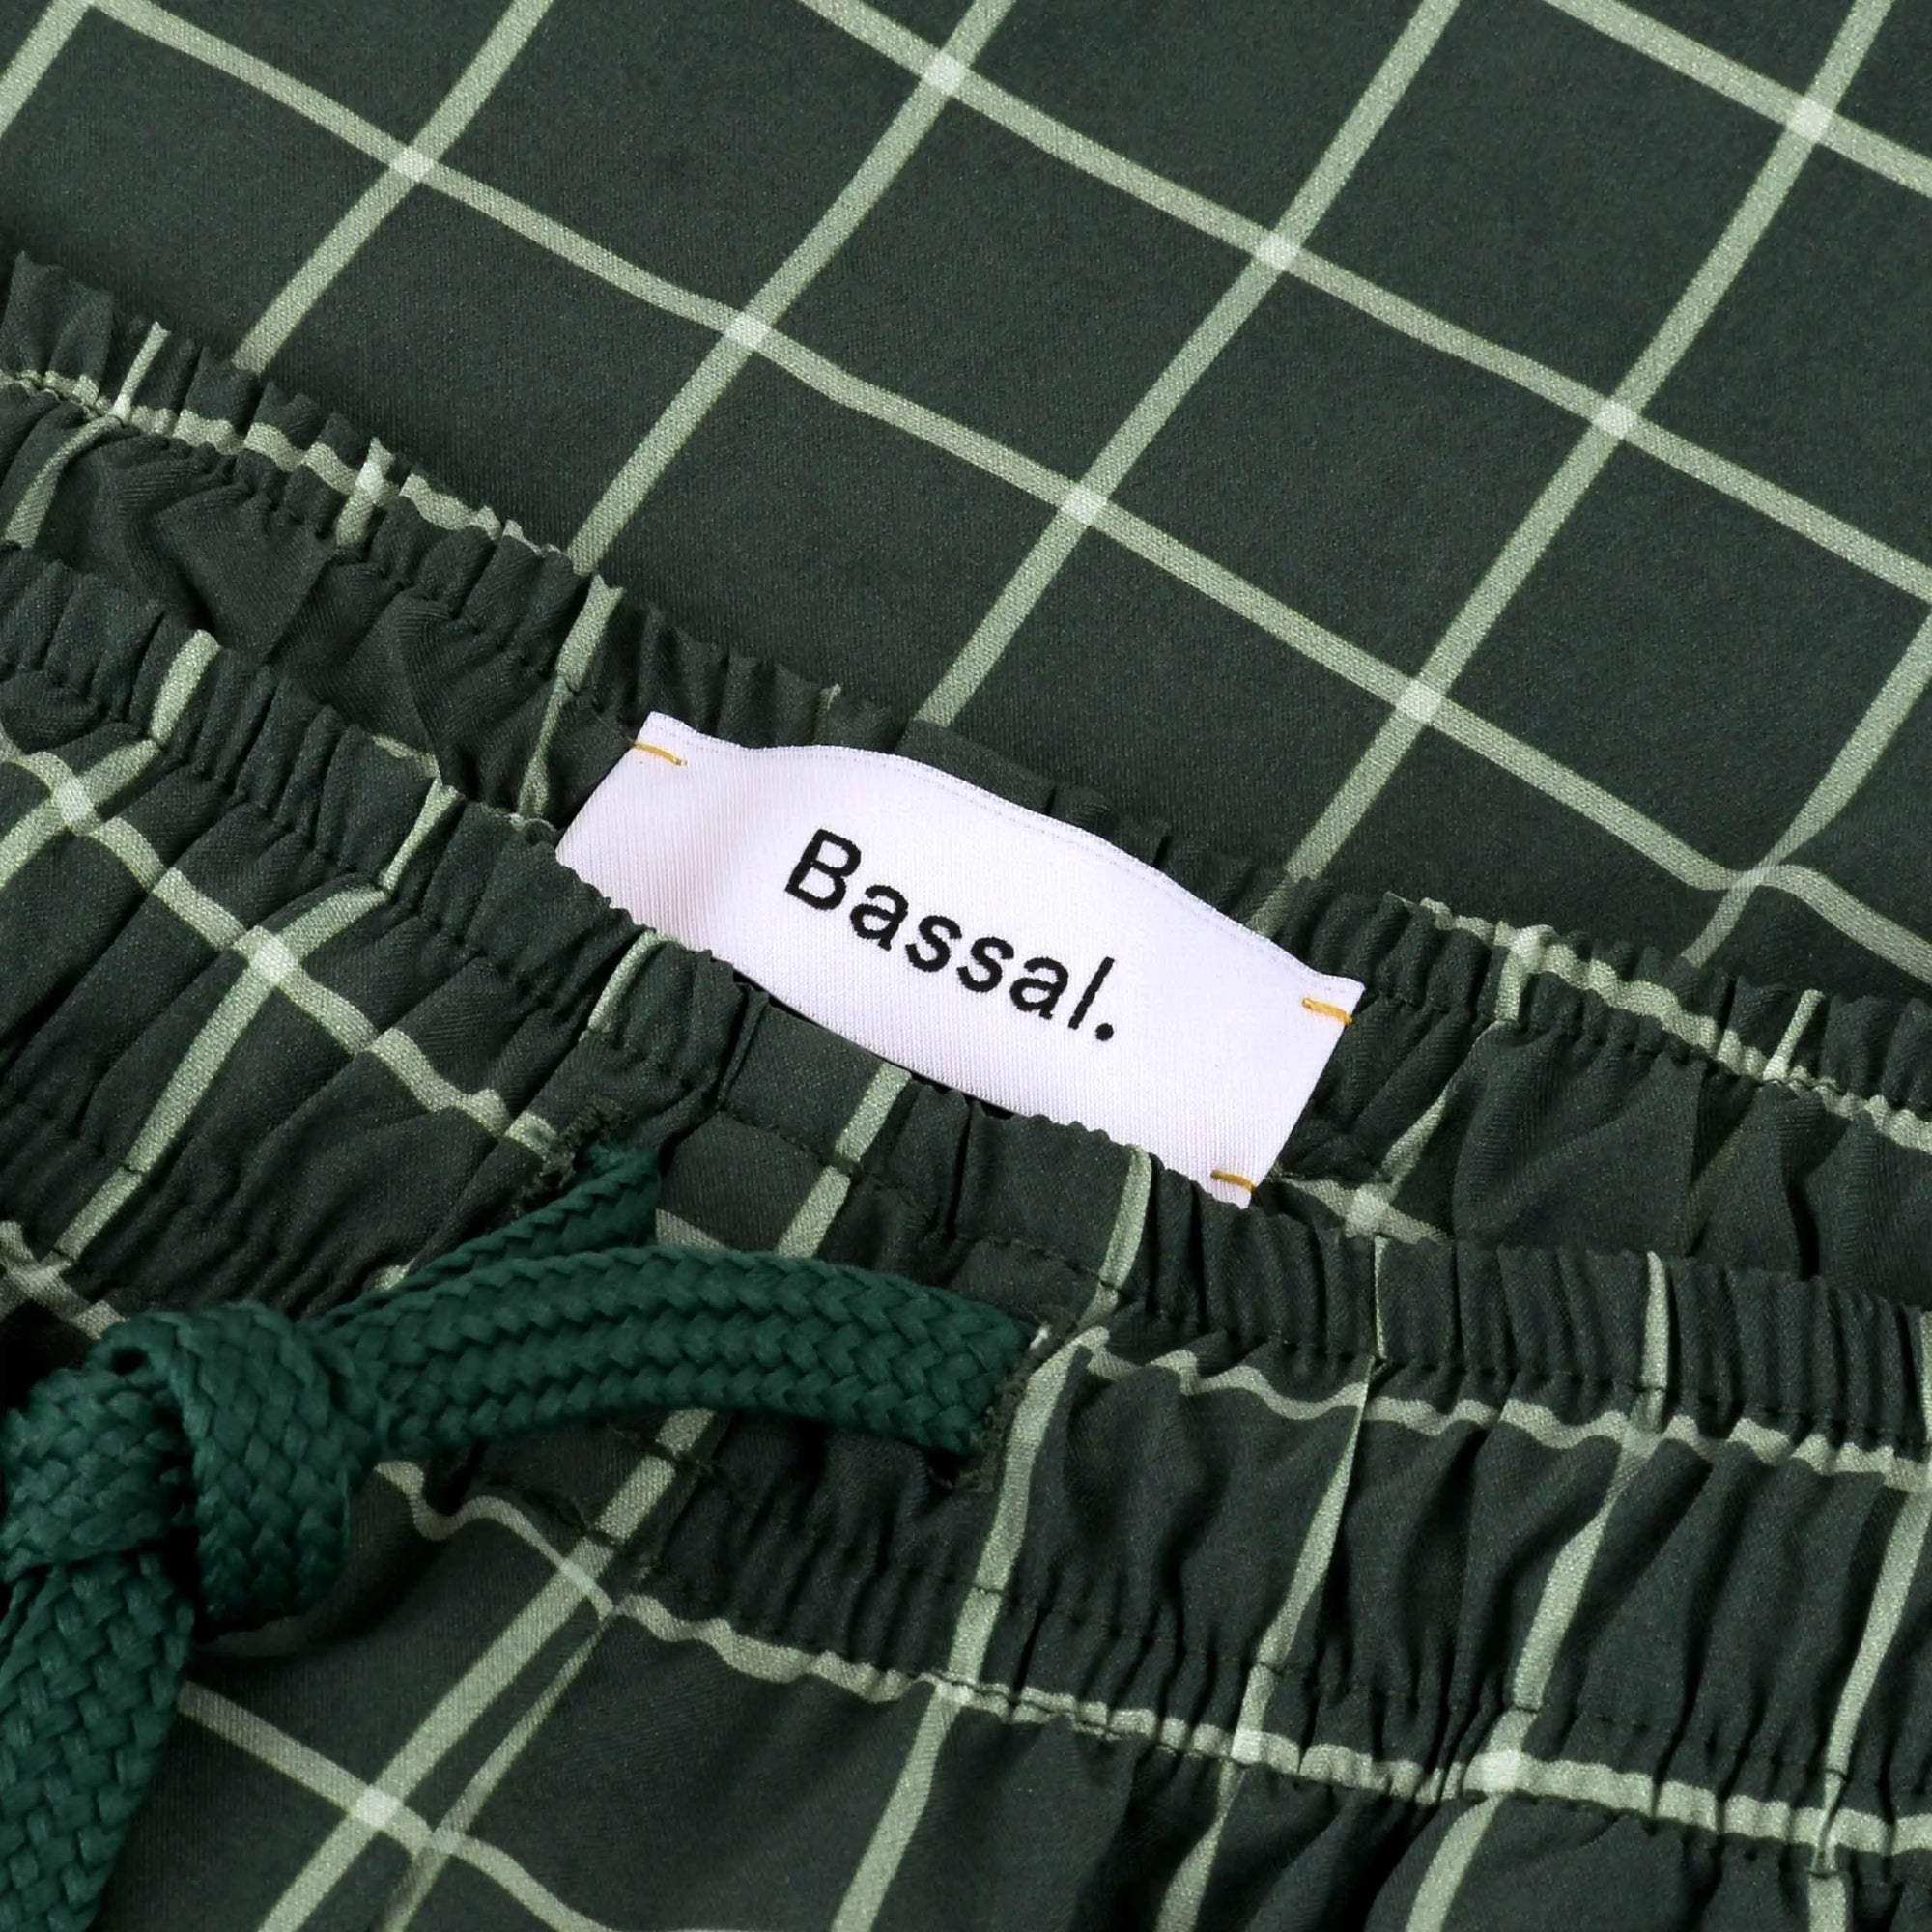 A pair of Verd Swimwear with a white grid pattern neatly folded inside a white box, along with a white product tag bearing the brand name "Bassal." The box lid, placed beside it, also displays the "Bassal" logo and hints at its exclusive availability at bassalstore.